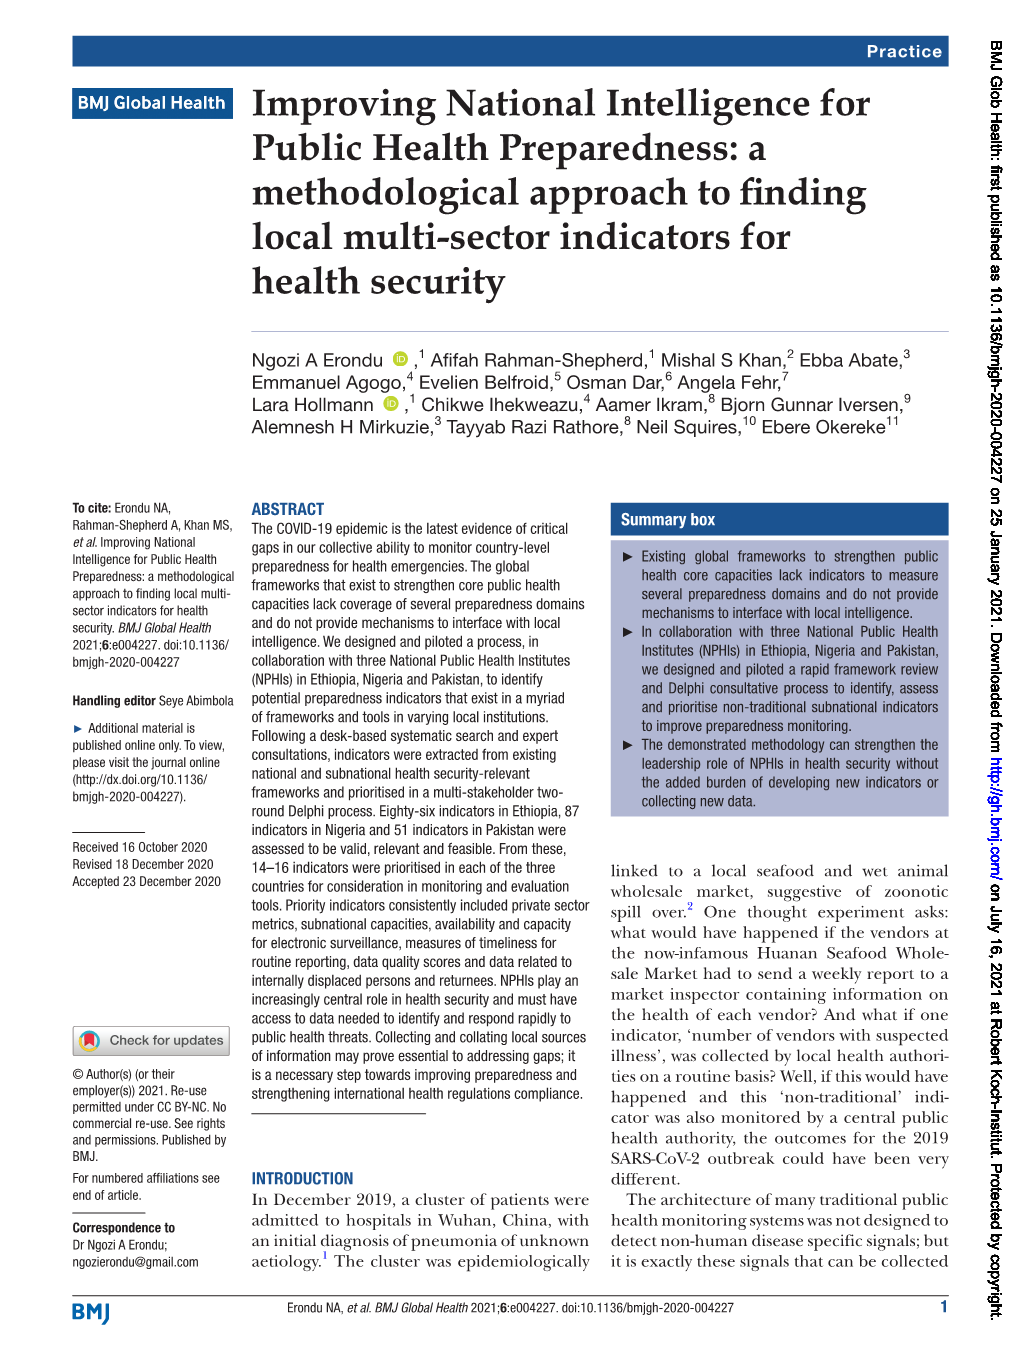 A Methodological Approach to Finding Local Multi-Sector Indicators